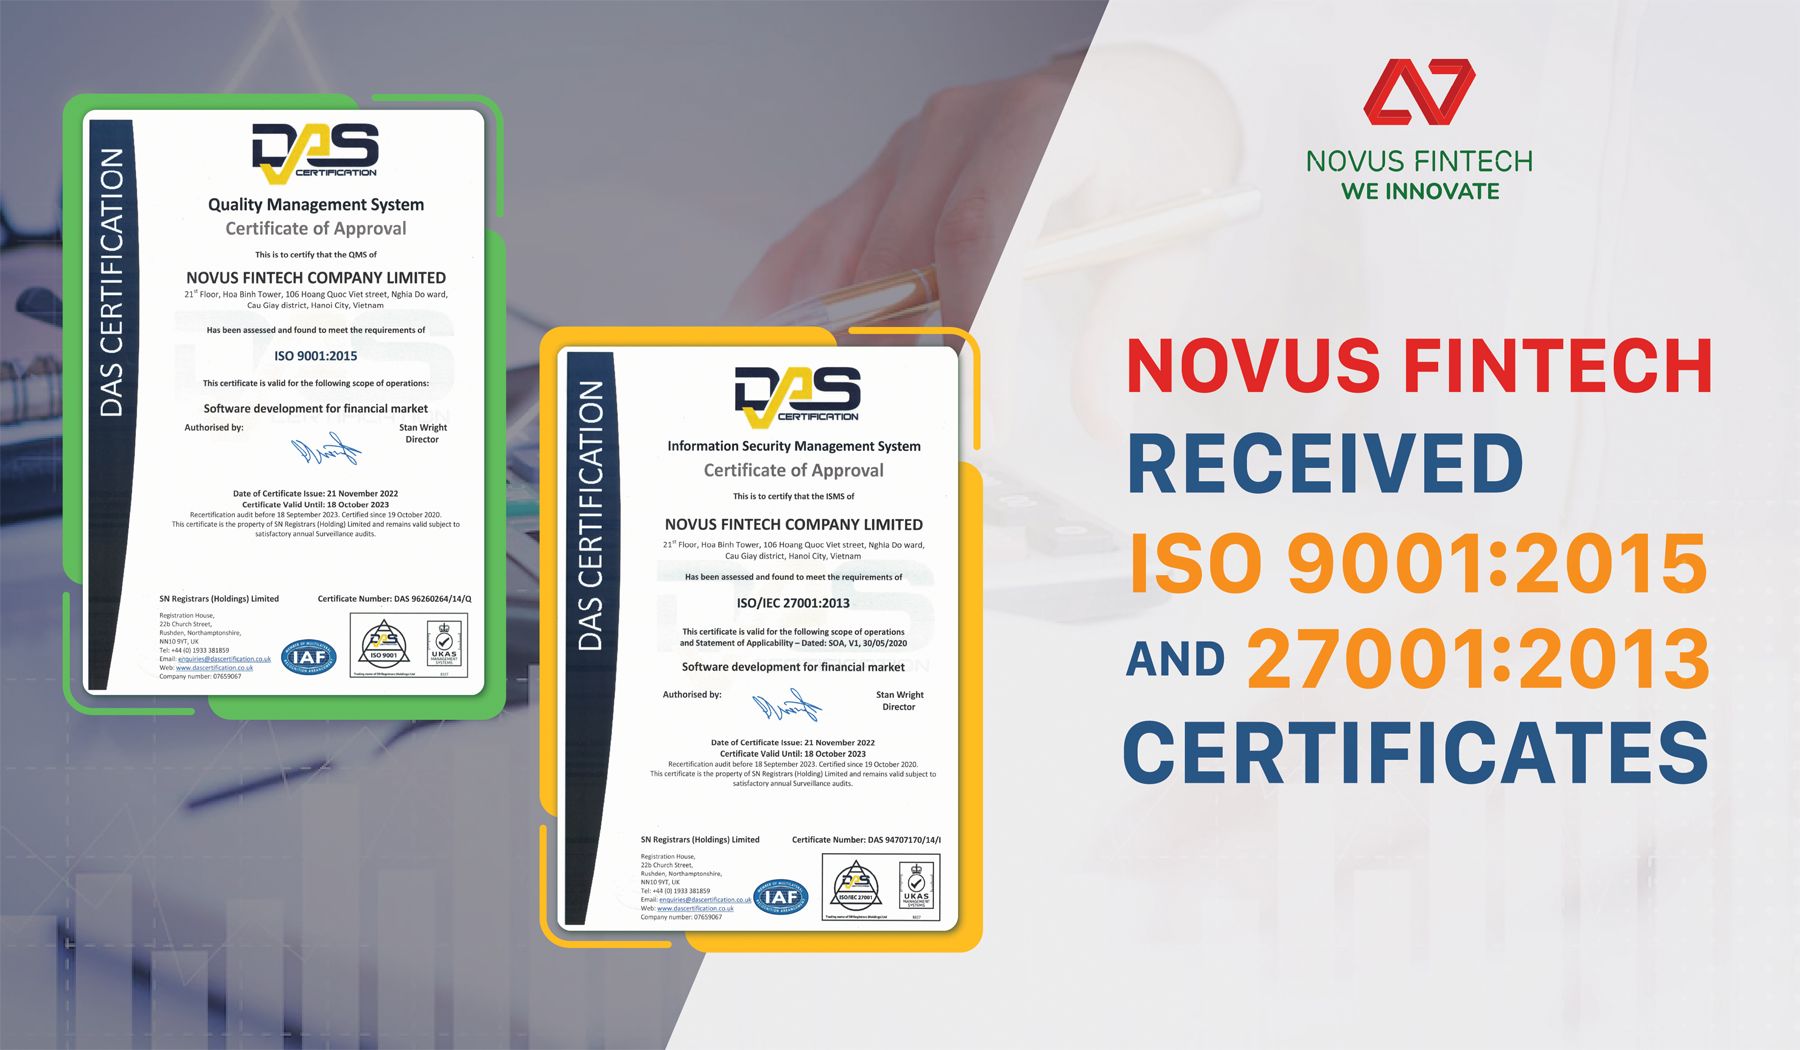 Honored to achieve an ISO Certificate, Novus Fintech affirms 15 years of efforts